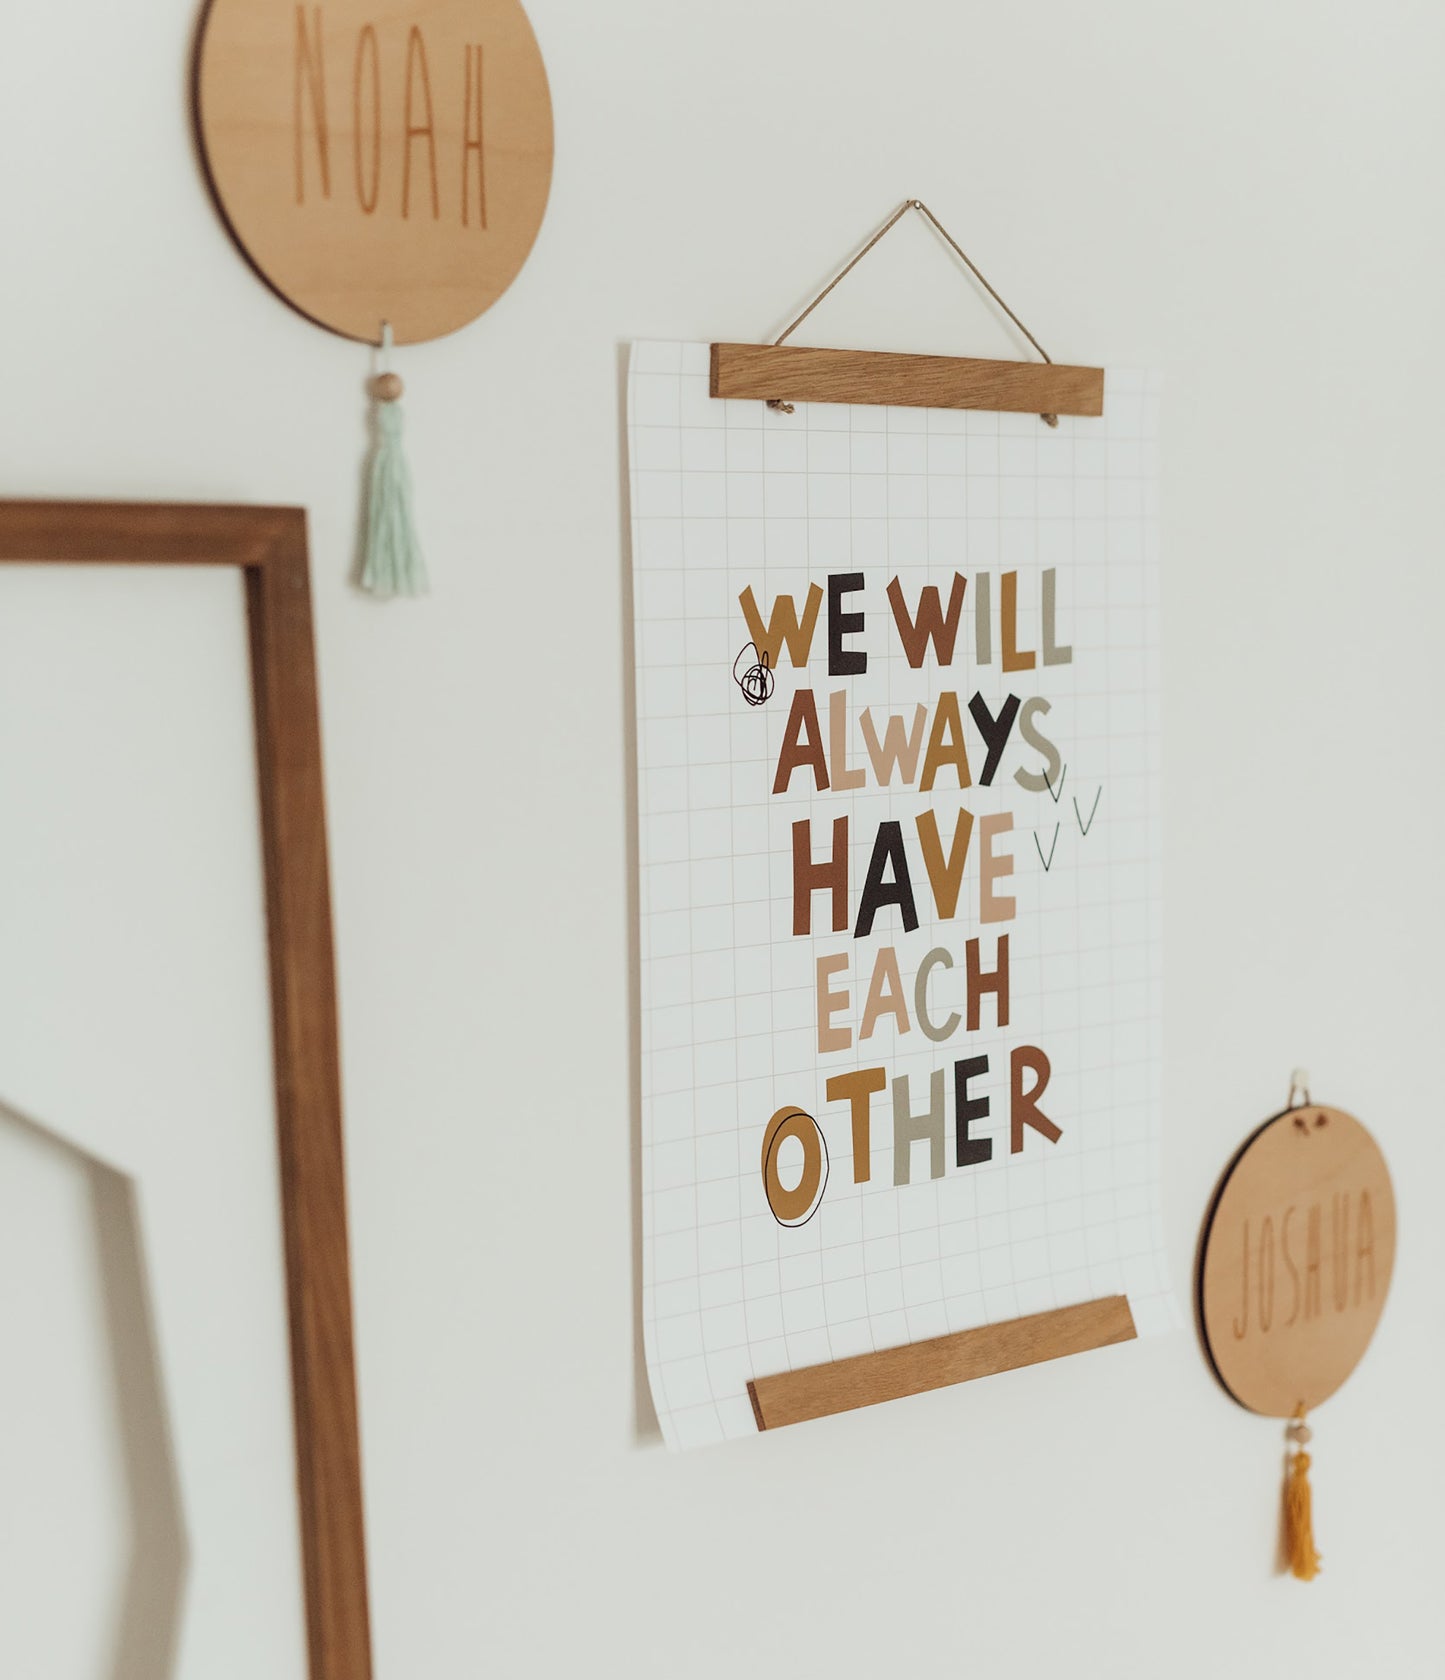 We will always have each other - Geschwisterposter A3